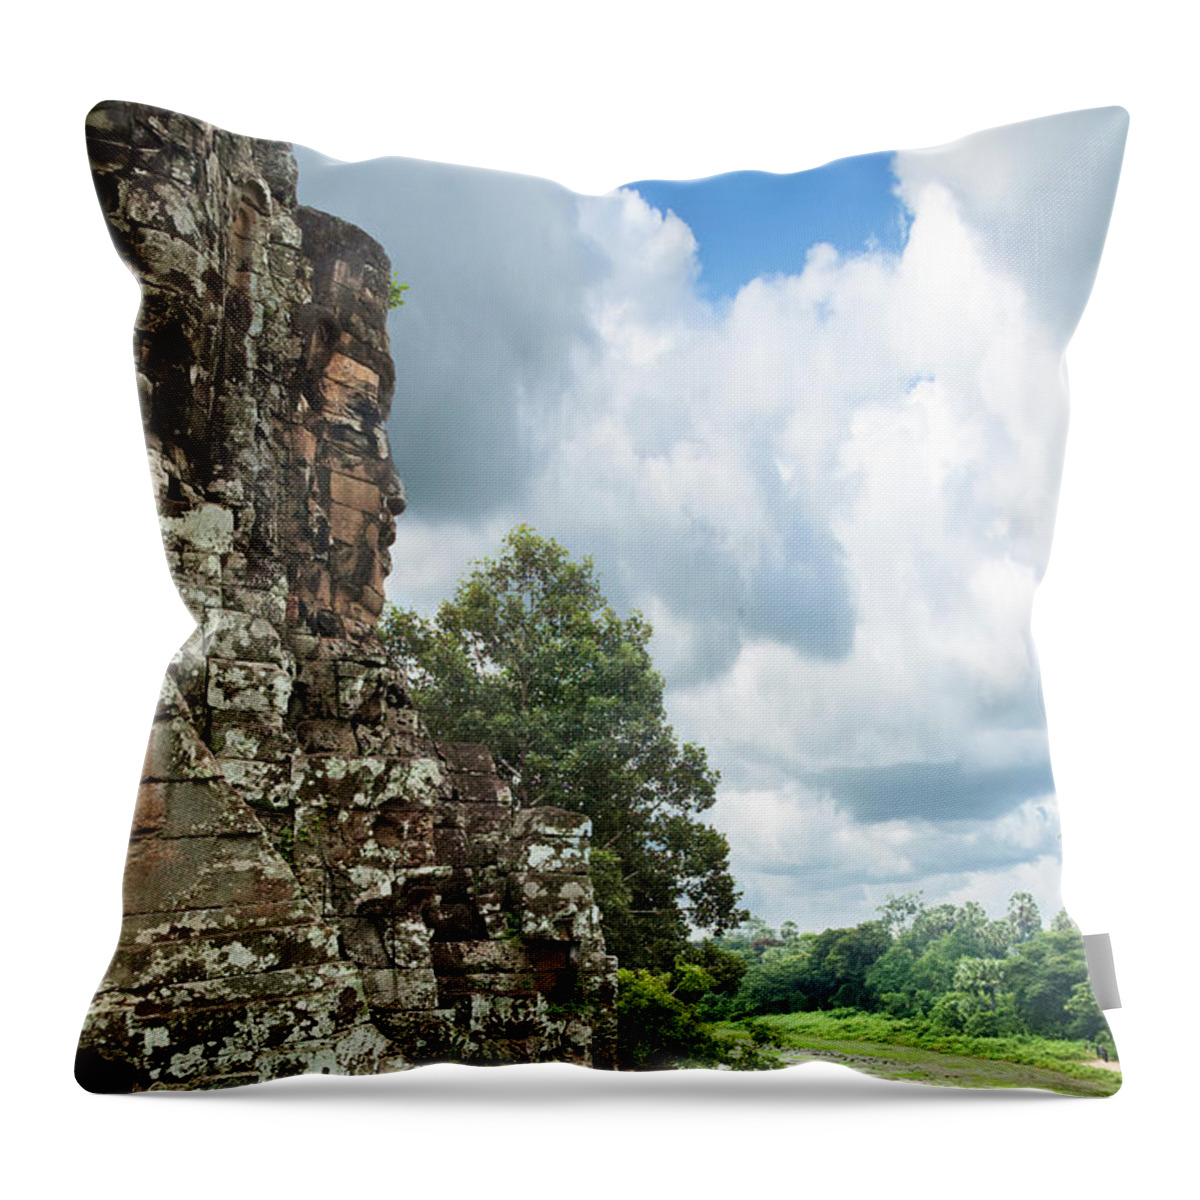 Tropical Rainforest Throw Pillow featuring the photograph The Faces Of Bayon An Angkor In Cambodia by Tbradford